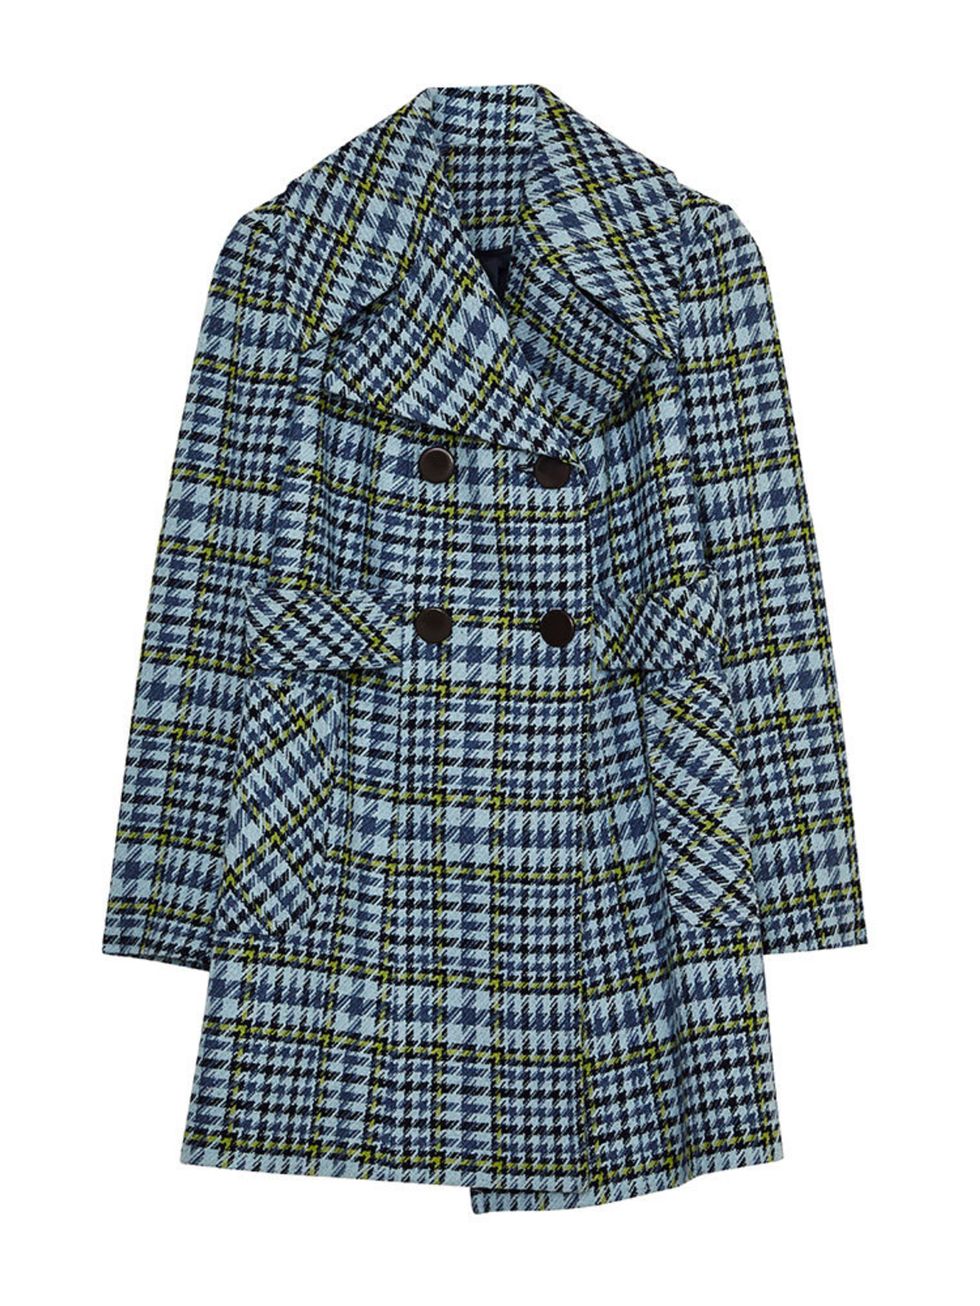 <p><a href="http://www.asos.com/ASOS/ASOS-Coat-in-60s-Check/Prod/pgeproduct.aspx?iid=5517223&cid=2623&sh=0&pge=0&pgesize=36&sort=-1&clr=Baby+blue&totalstyles=390&gridsize=3" target="_blank">ASOS</a> coat, £85</p>